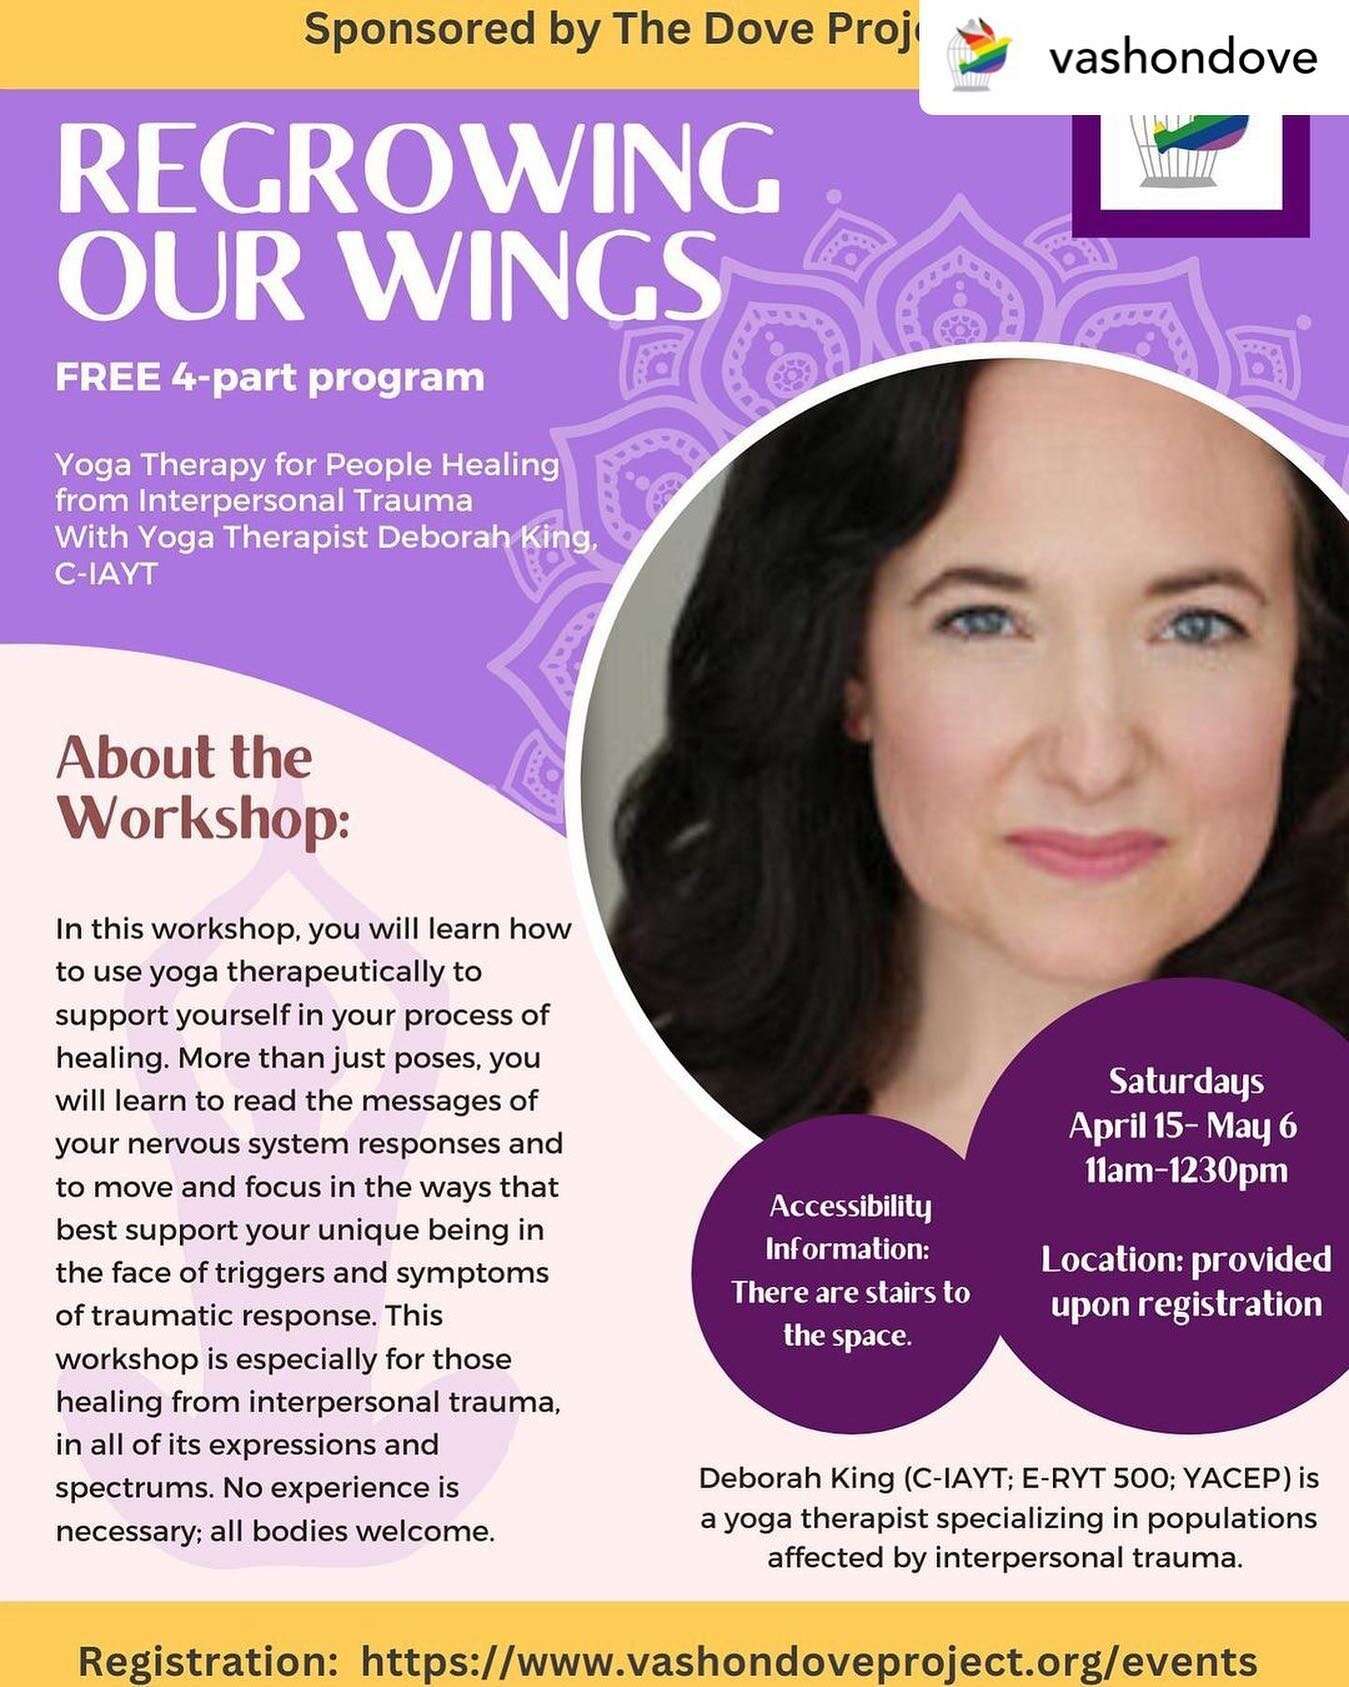 Posted @withregram &bull; @vashondove REGROWING OUR WINGS: Yoga Therapy for People Healing from Interpersonal Trauma
With Yoga Therapist Deborah King, C-IAYT, in partnership with The Dove Project
Saturdays, April15- May 6 In-Person
11am-1230pm
Locati